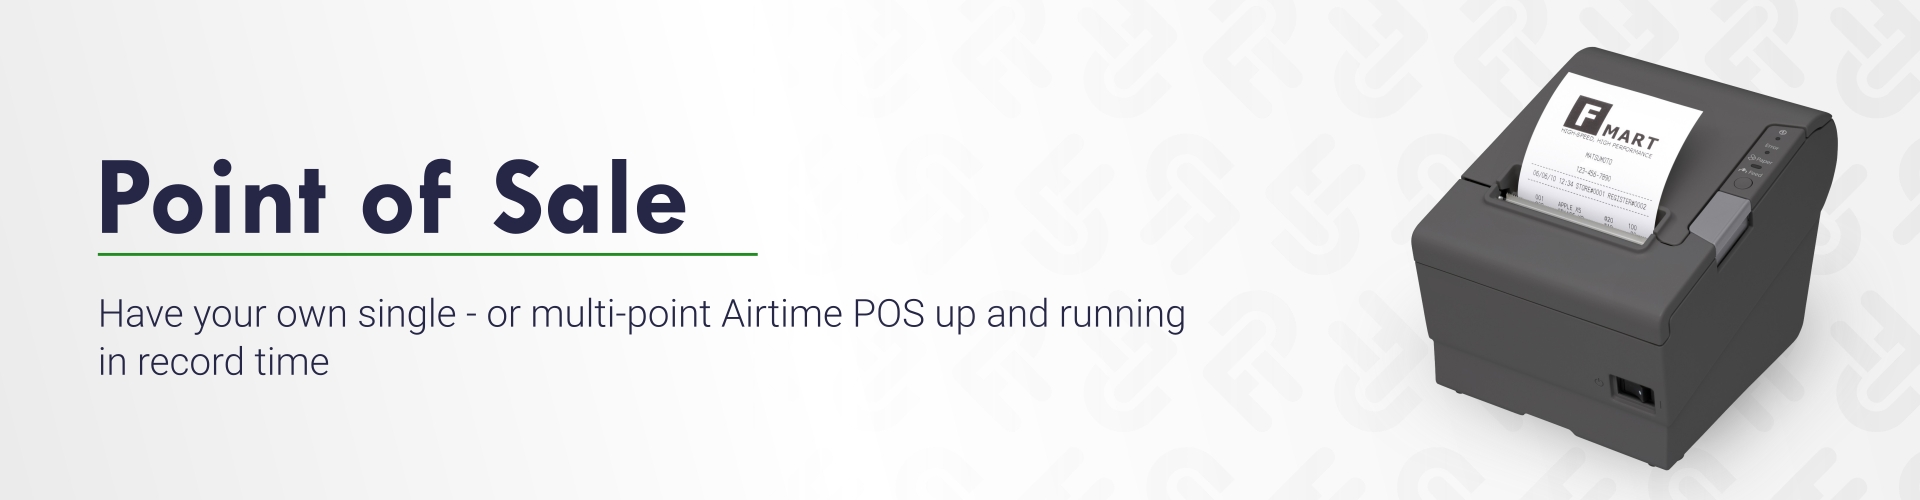 Point of Sale Airtime